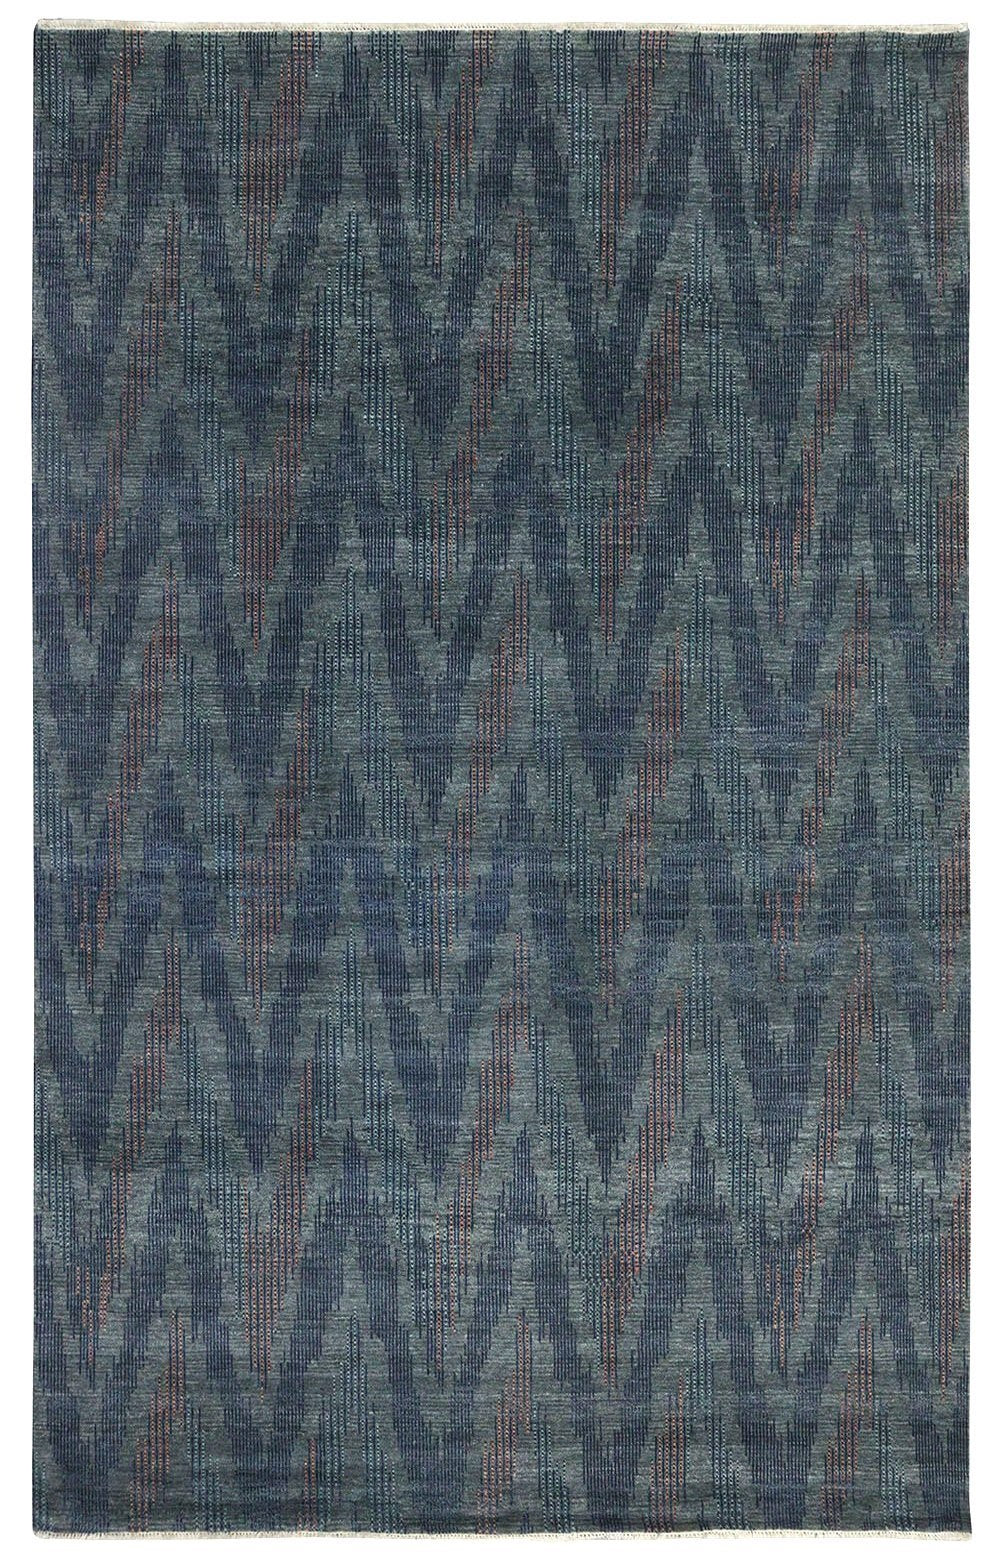 Flame Stitch Handwoven Contemporary Rug